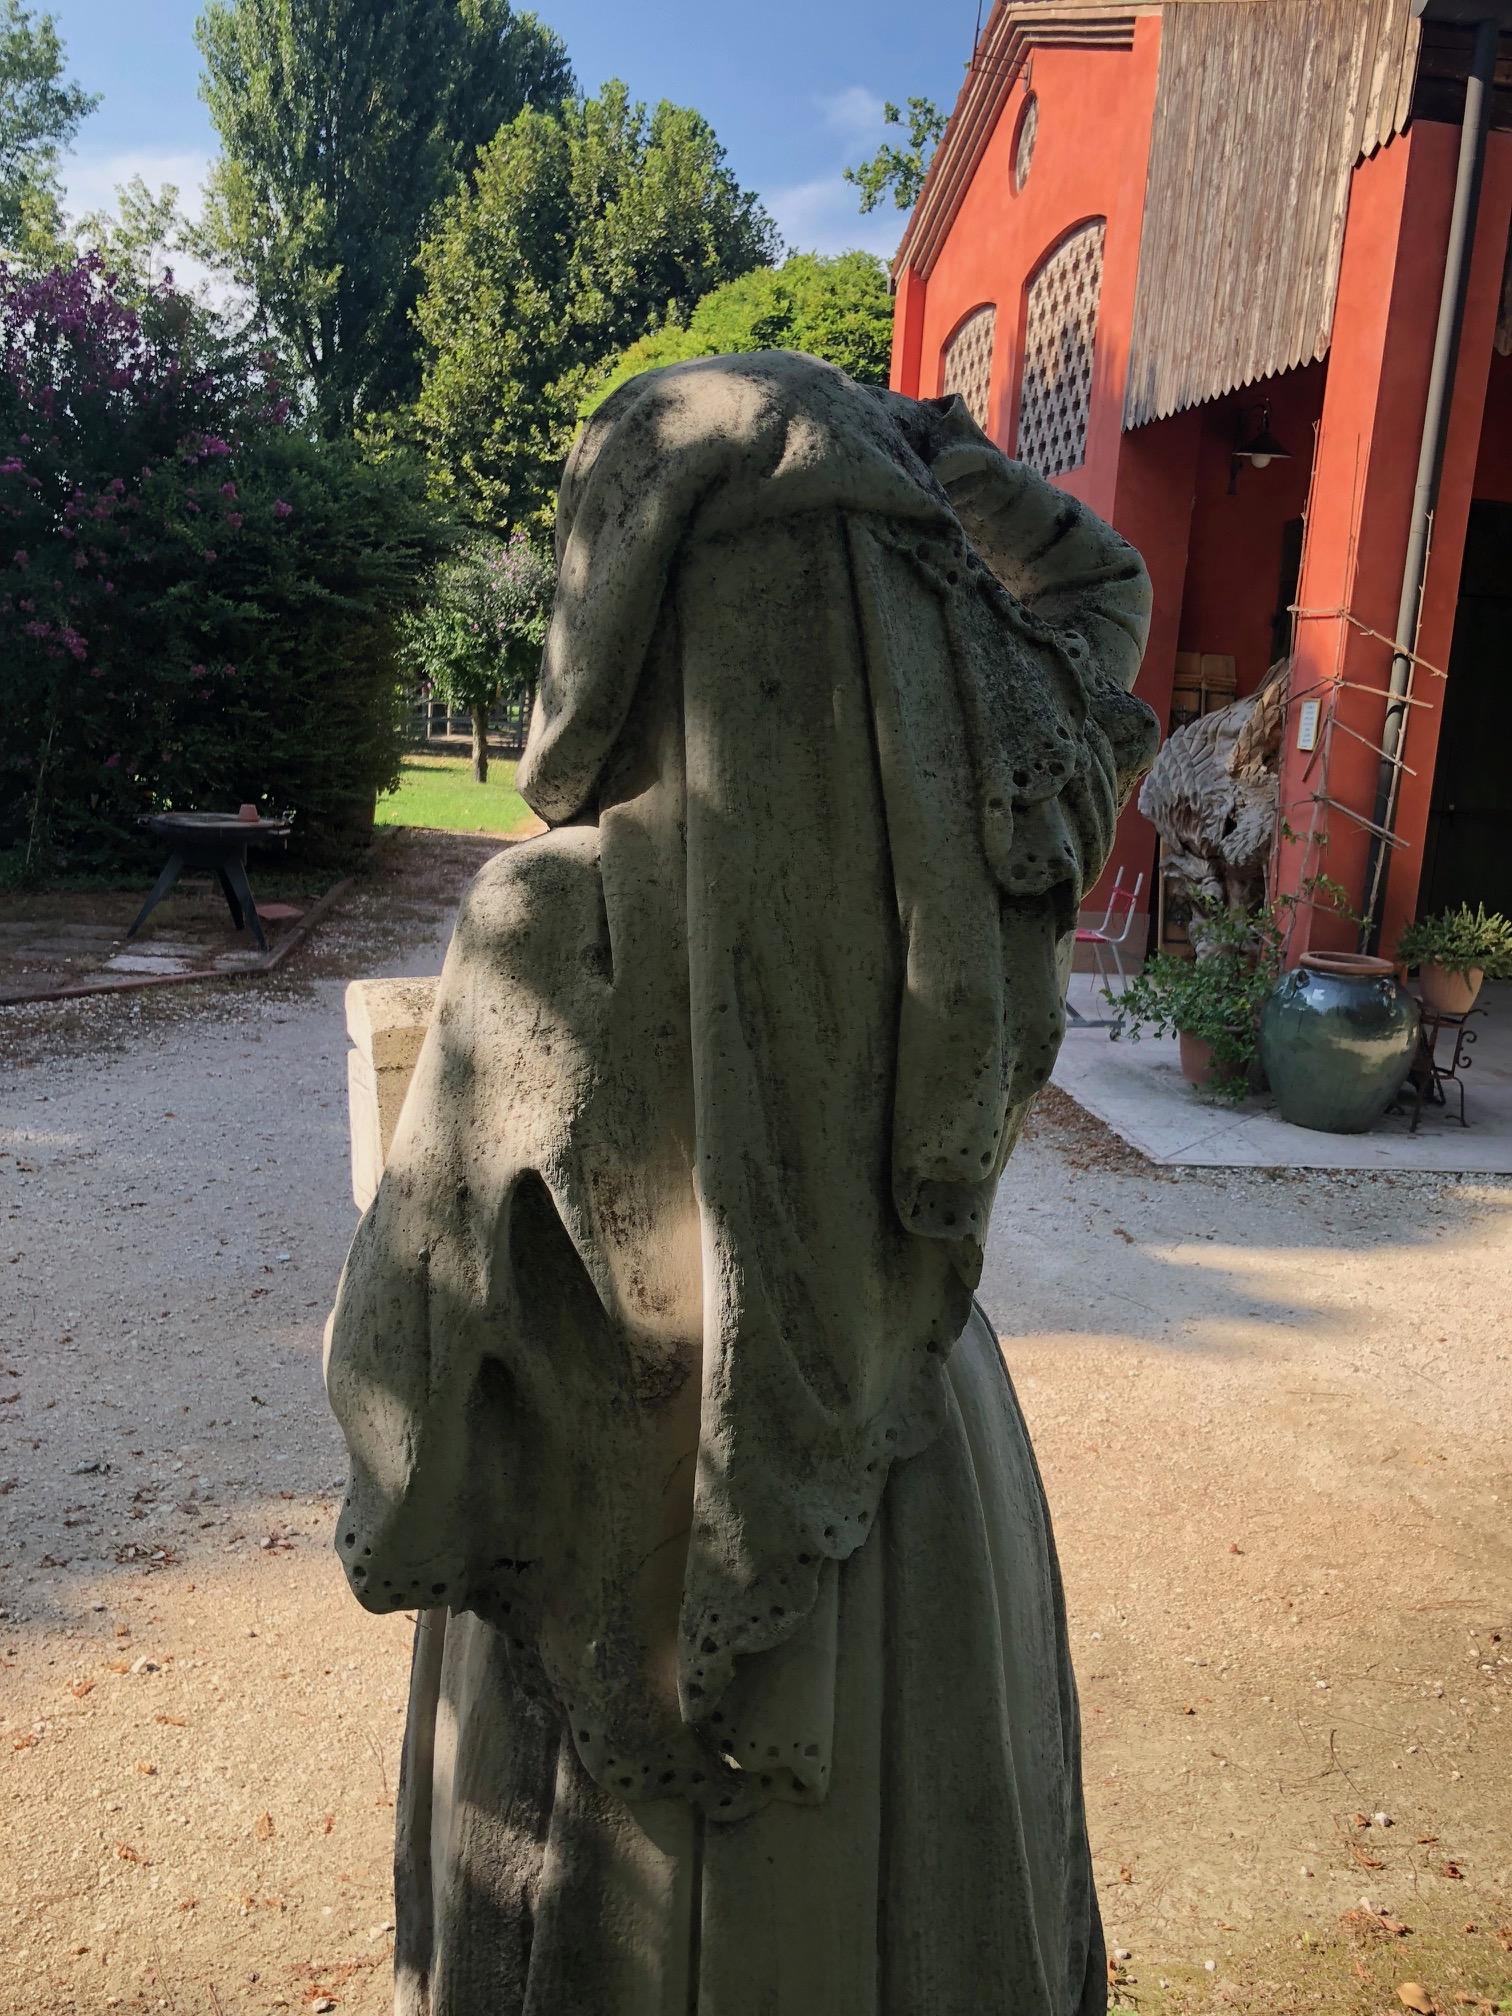 A decorative cement garden statue part of a set of 8 statues.
Sculpture total height: 200 cm
Base dimensions: 60 cm x 60 cm
Period: first years of the 20th century
Provenance: Italy, important house near the city of Padova (Italy)
In good state